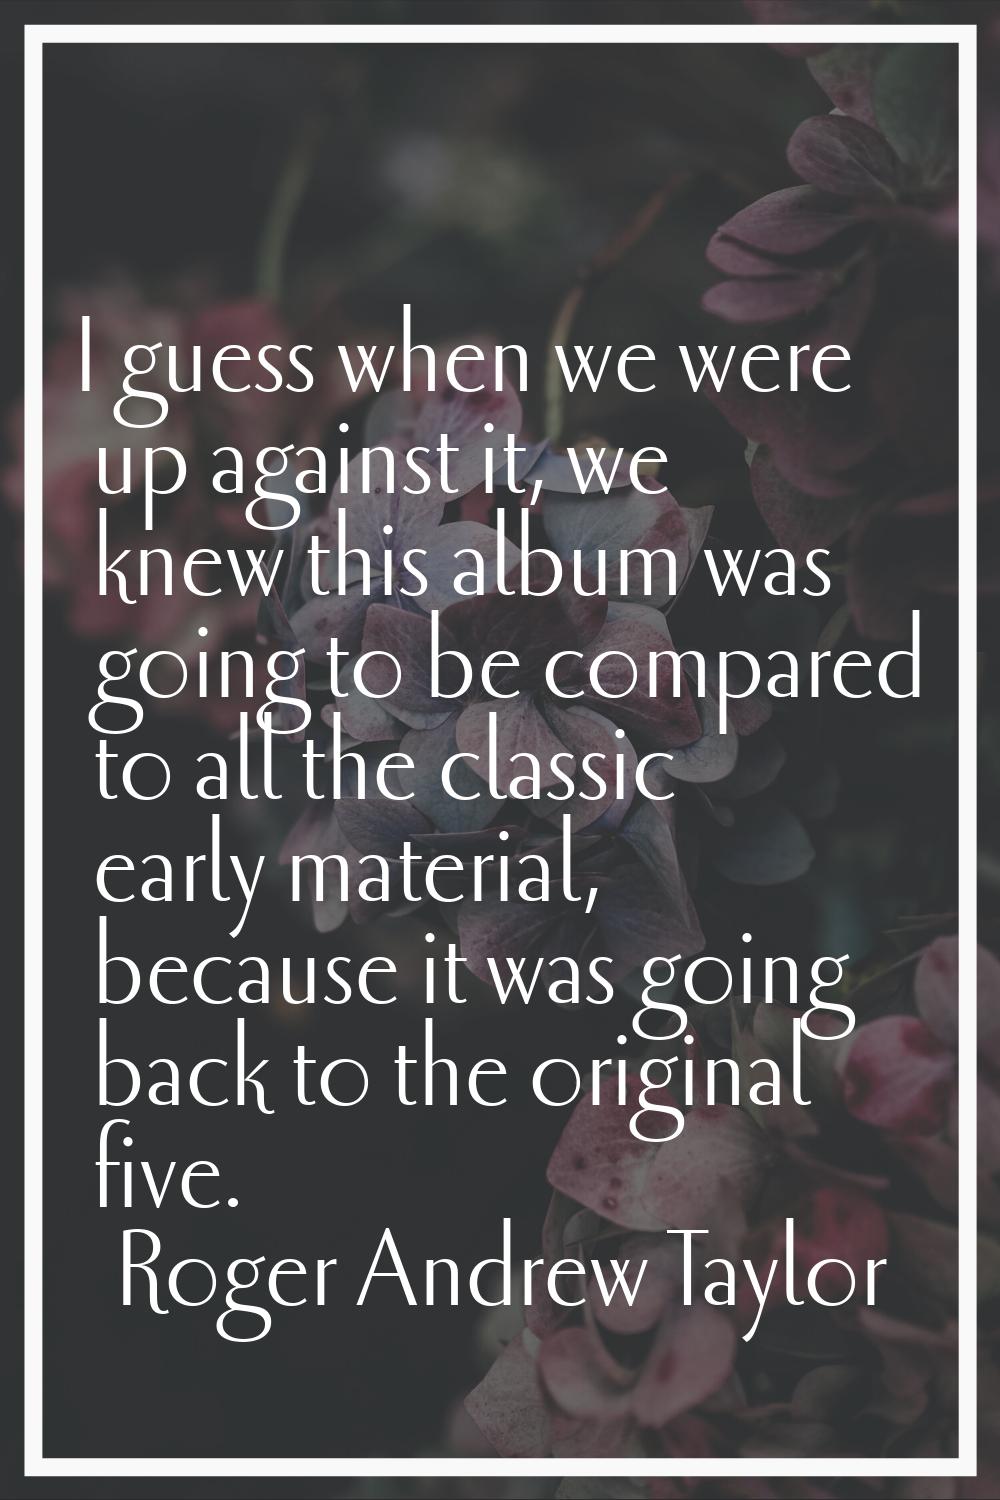 I guess when we were up against it, we knew this album was going to be compared to all the classic 